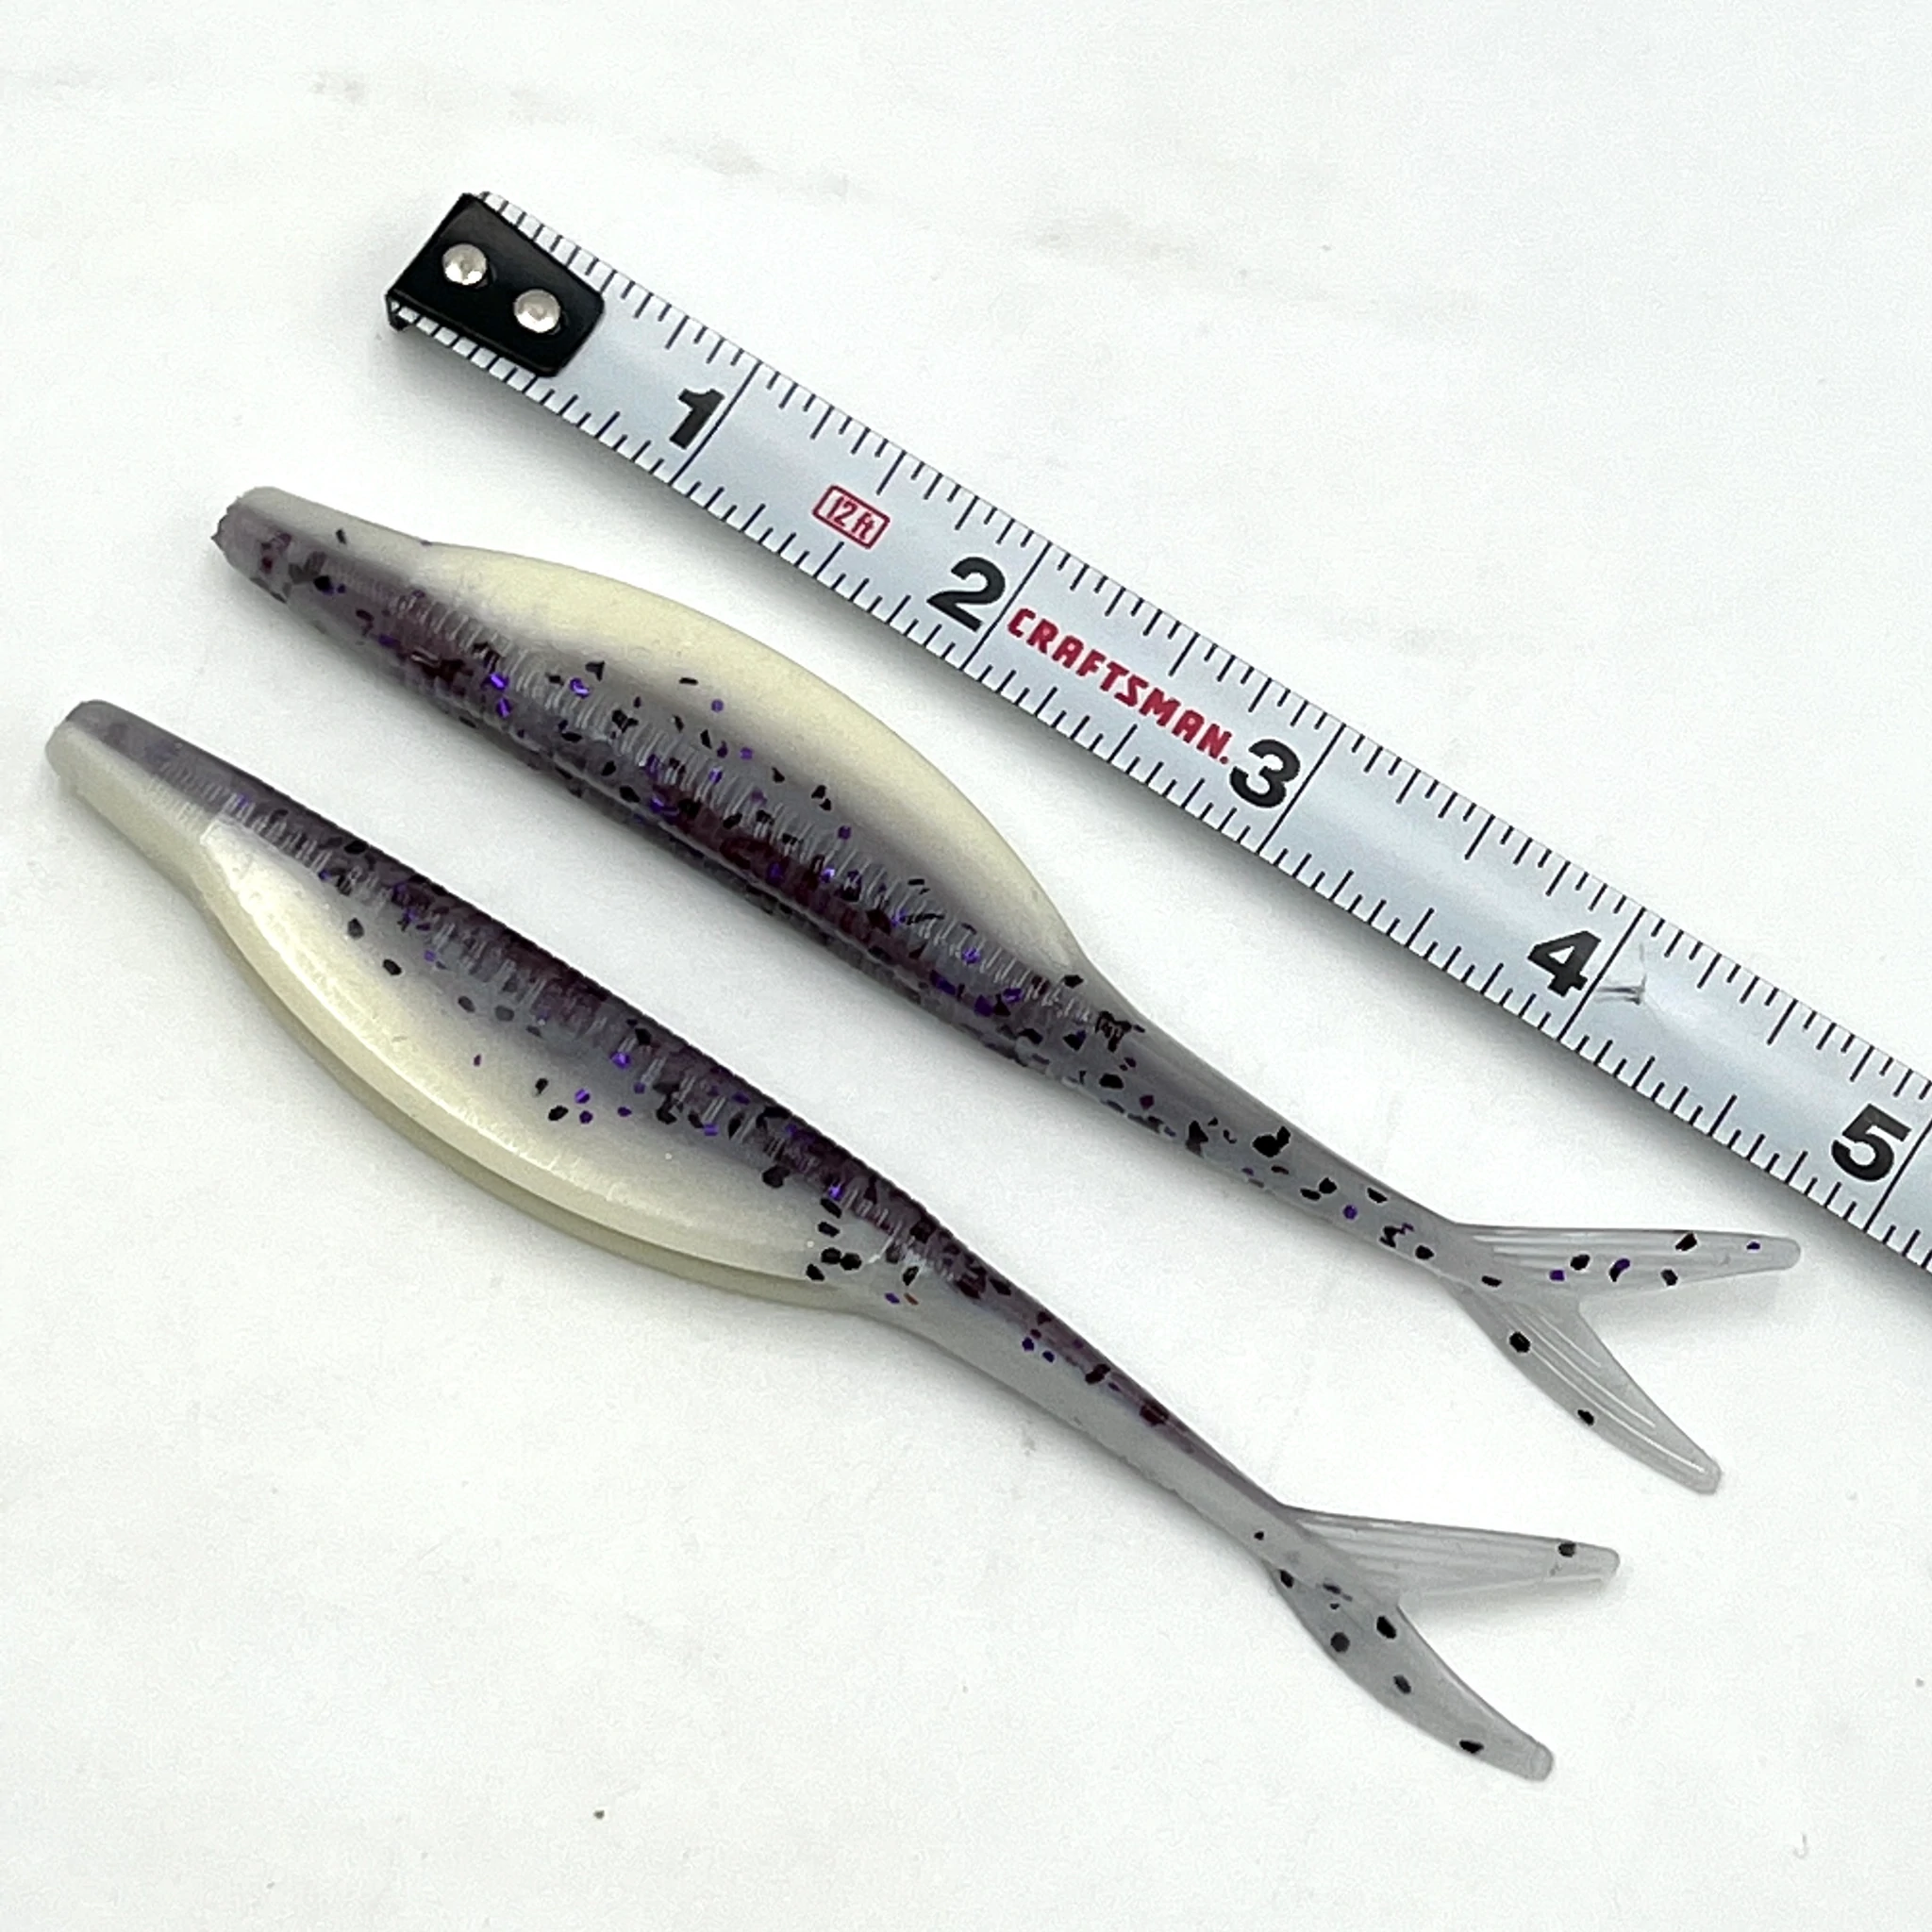 Double worm soft bait mold. Two-parted mold for the soft worm making